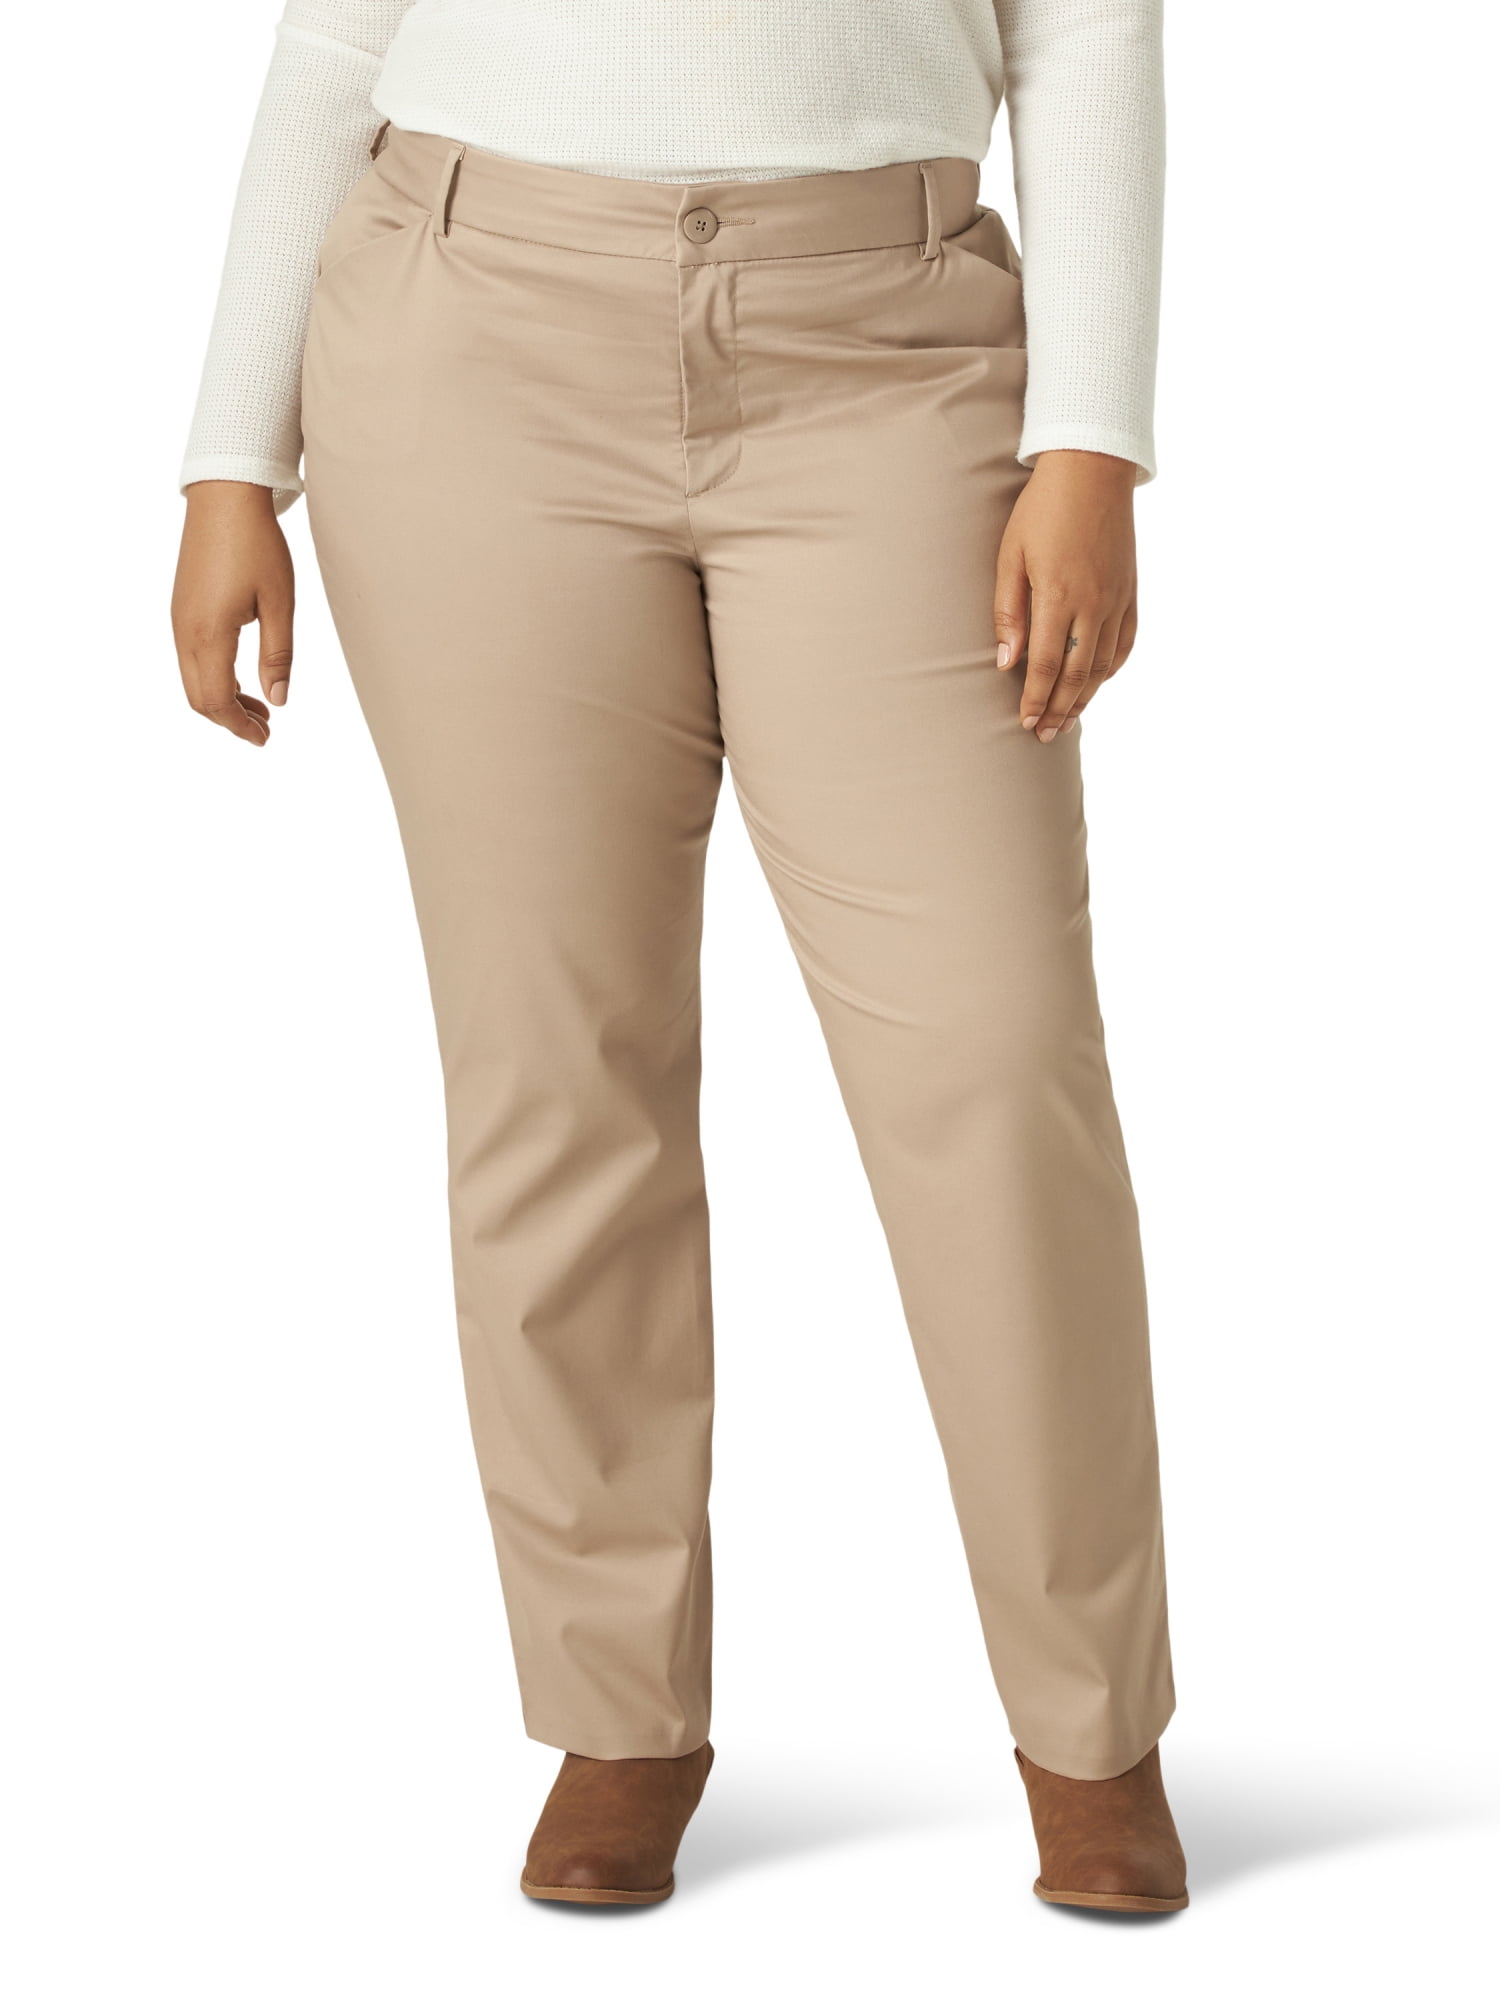 Women's Lee Plus Size Wrinkle Free Relaxed Fit Straight Leg Chino Pants |  SCHEELS.com